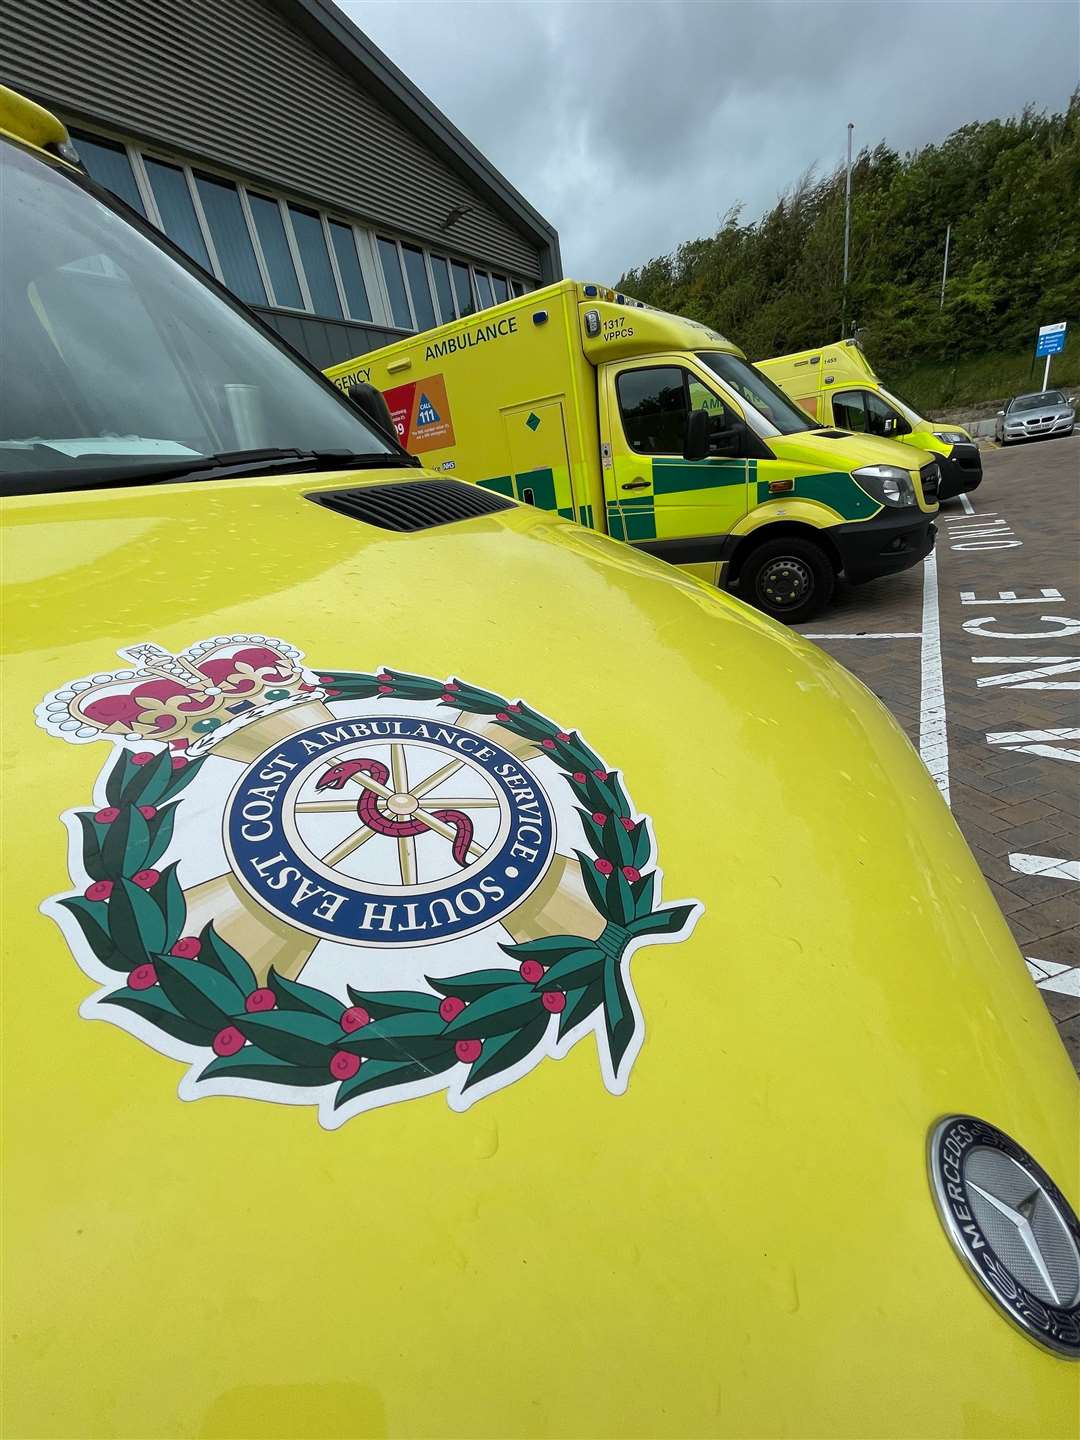 South East Coast Ambulance Service operates across Kent, Sussex and Surrey